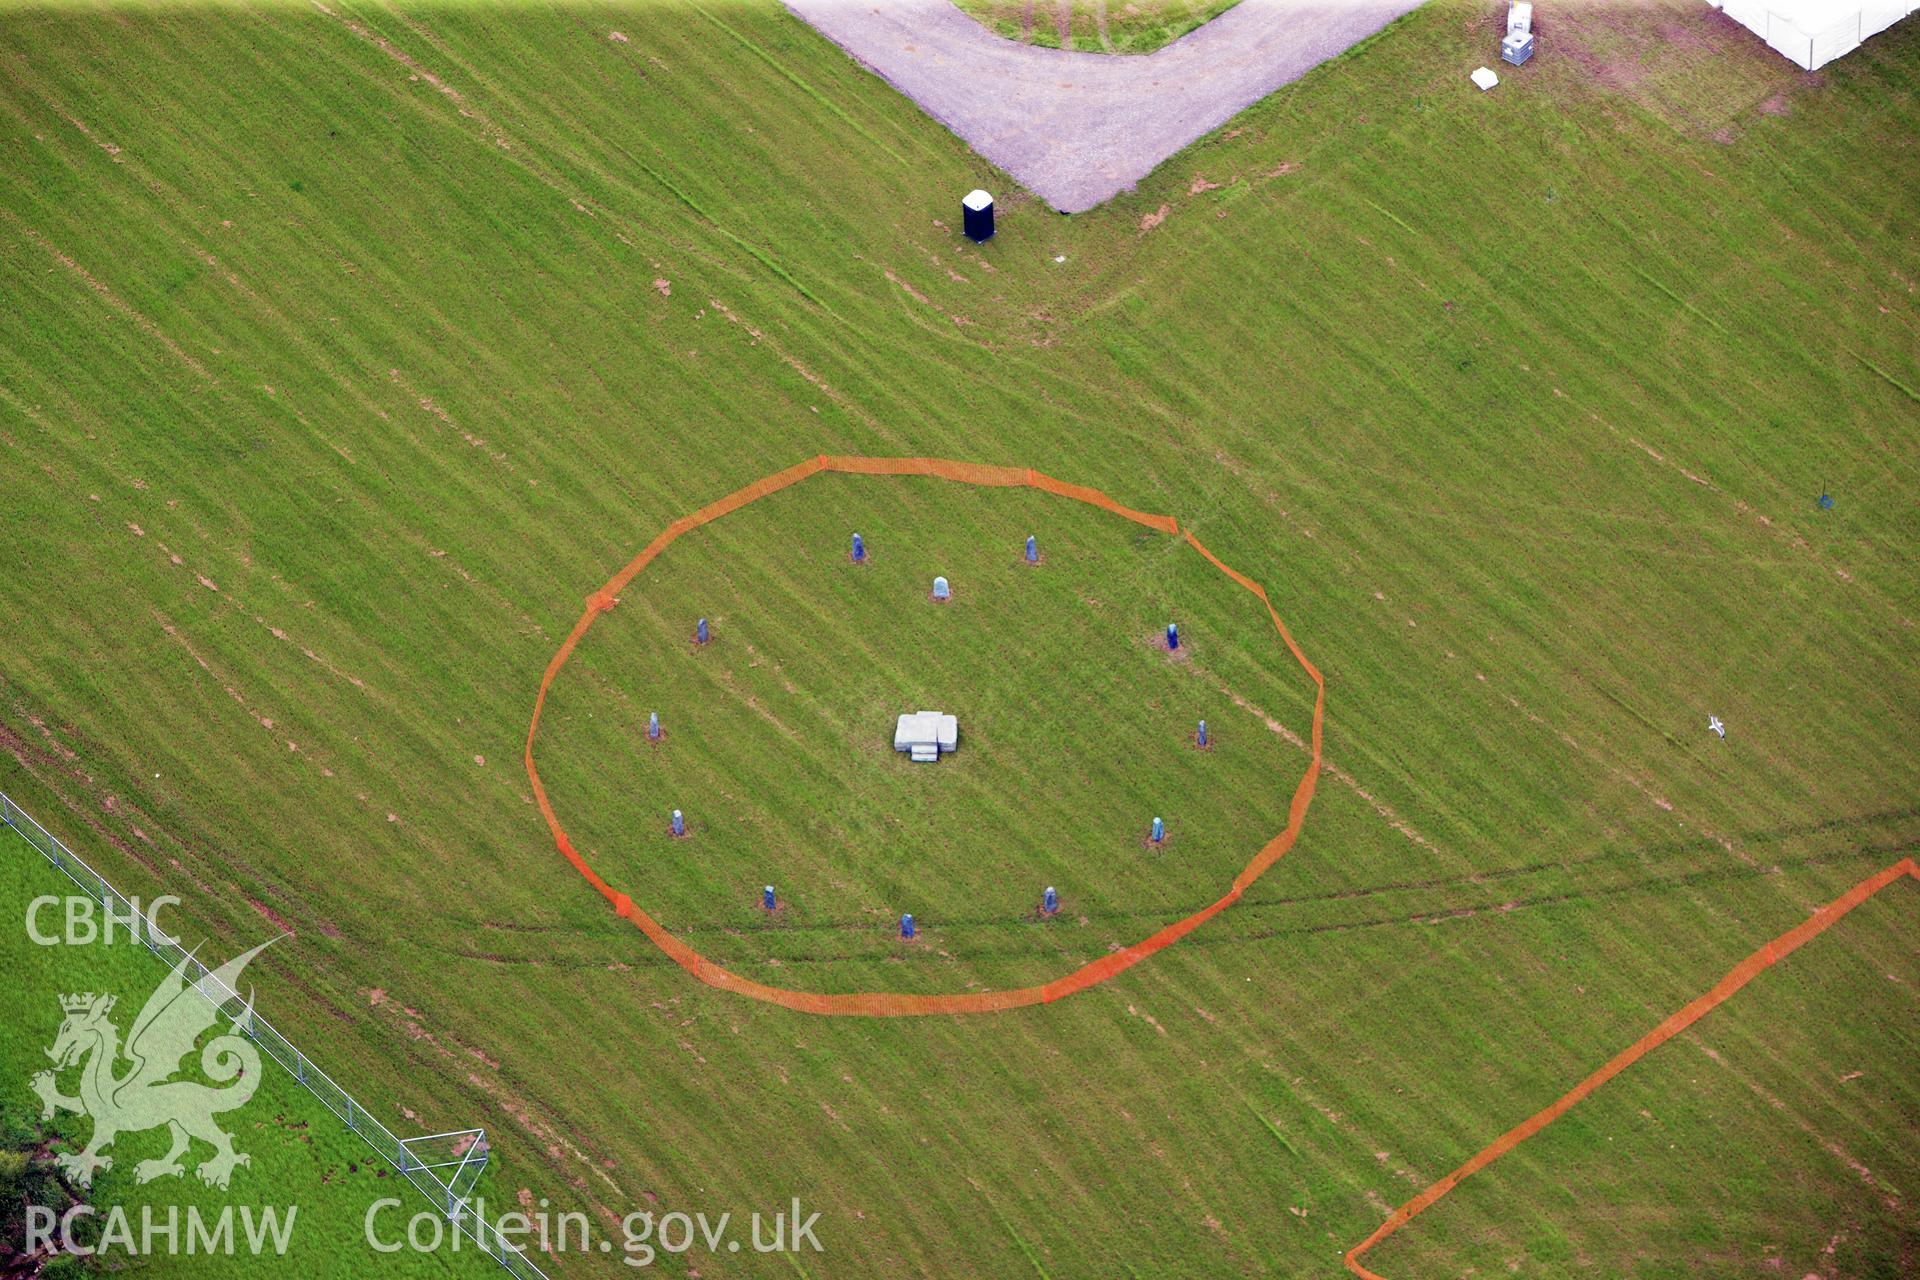 RCAHMW colour oblique photograph of Llandow Airfield. Taken by Toby Driver on 05/07/2012.